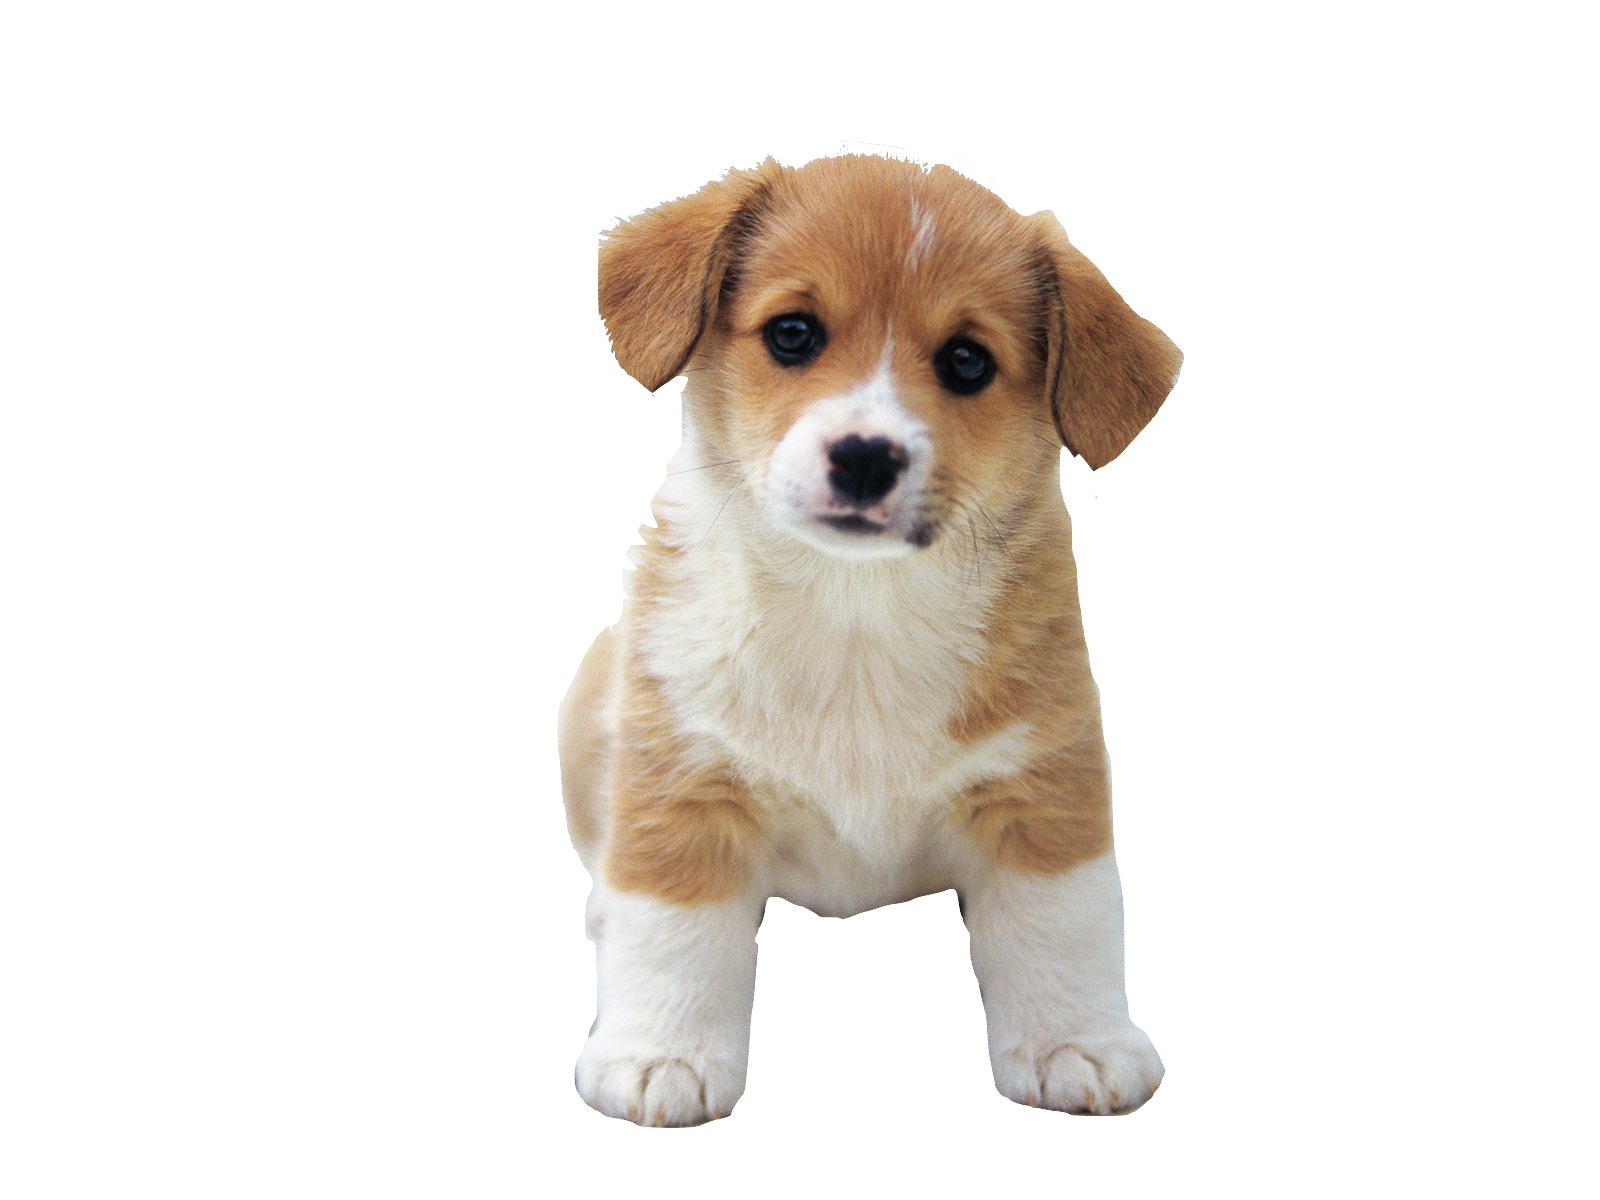 Png Puppy Dog - So Cute Puppies Image, Transparent background PNG HD thumbnail